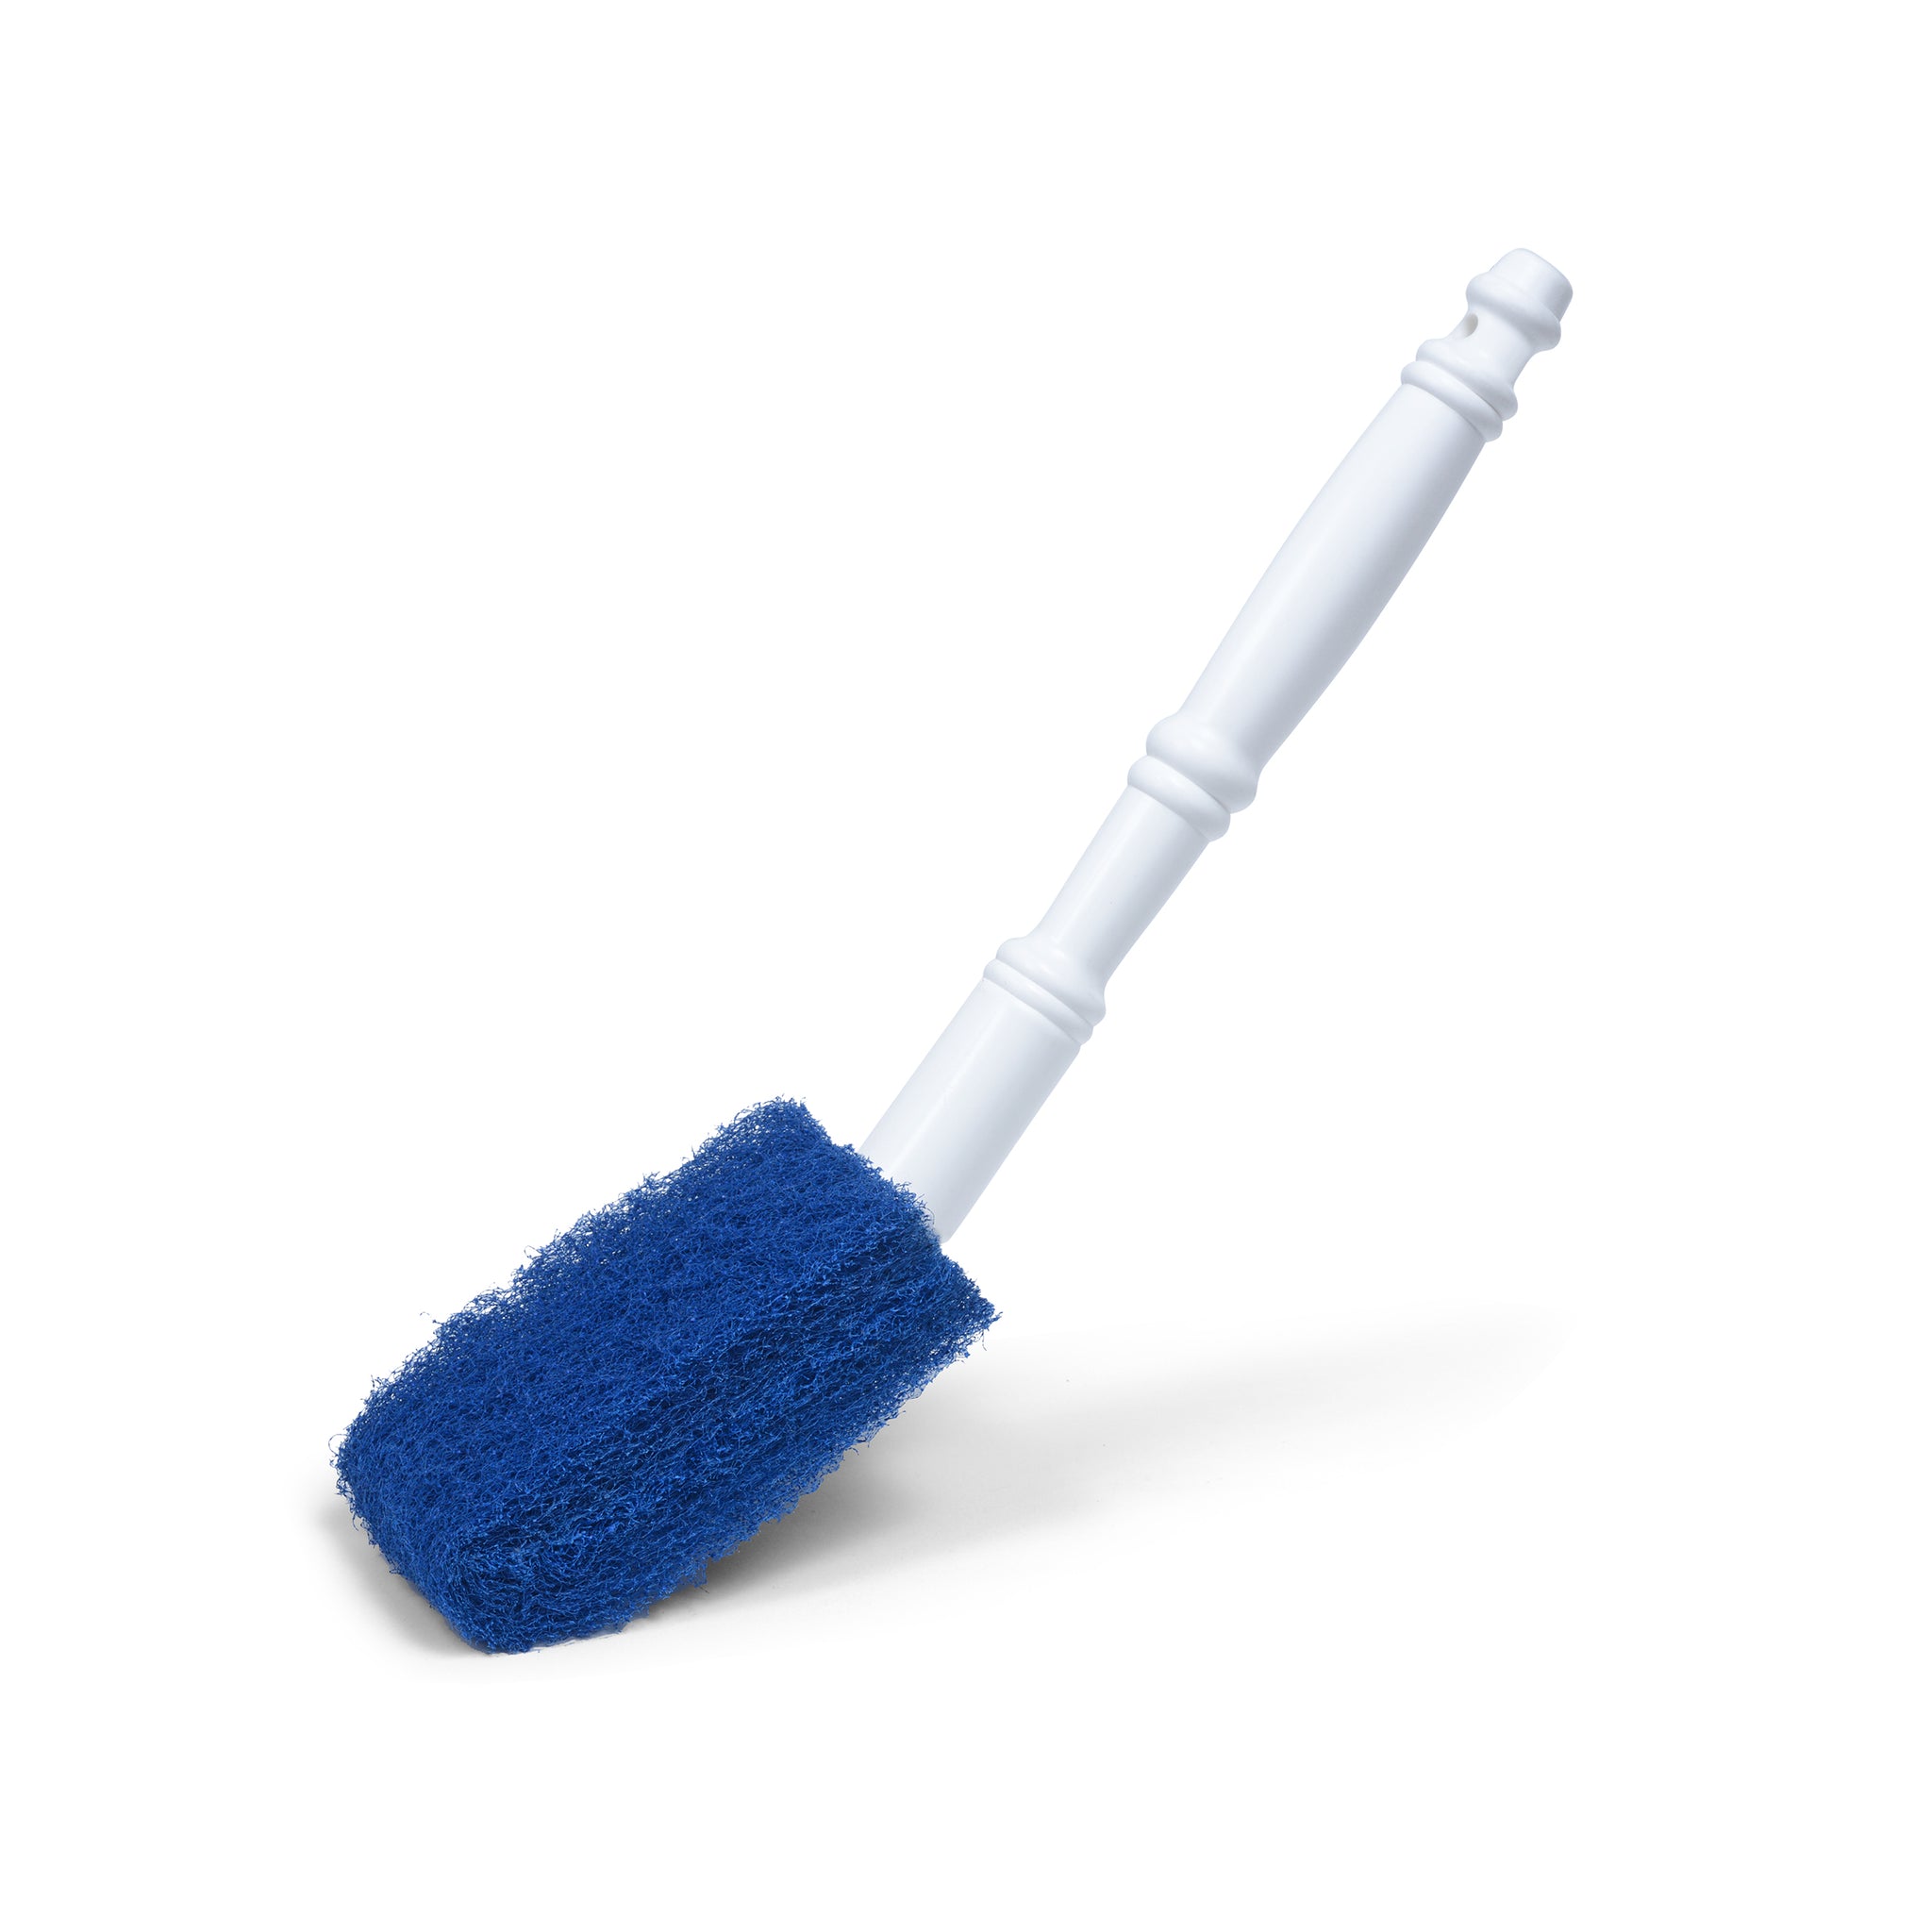 POWERFUL, NON-ABRASIVE BATHTUB, SHOWER & SPA BRUSH, Brushtech Brushes Inc.  - America's #1 Source for all Specialty and Hard-To-Find Brushes - Buy  Direct and Save!